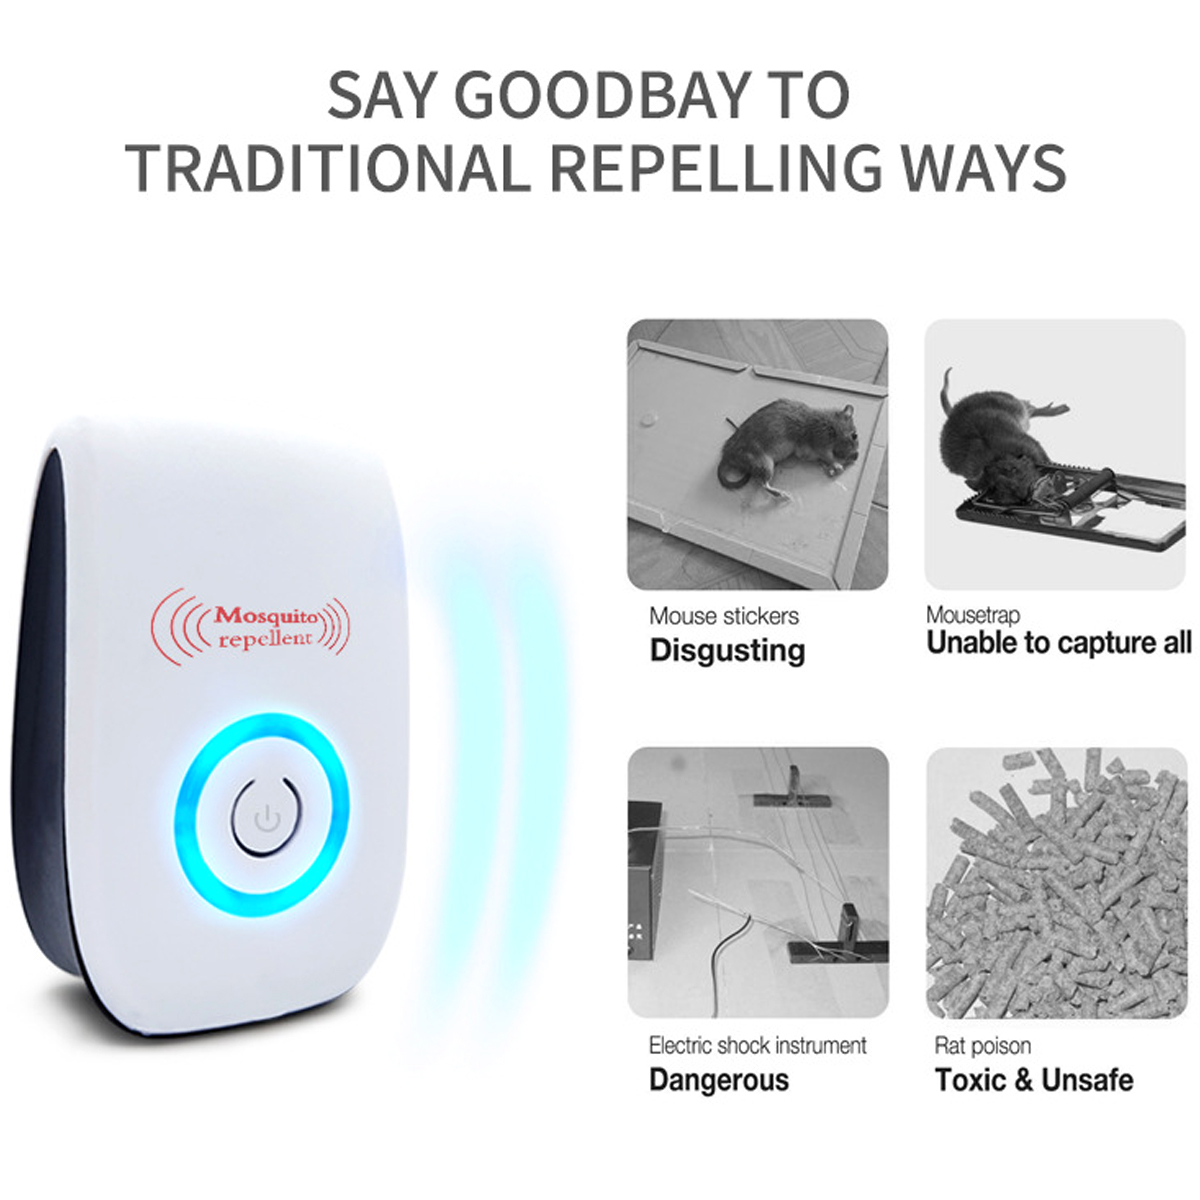 Ultrasonic-Electronic-Pests-Insect-Repeller-Anti-mouse-Mosquito-Cockroach-Rodent-Insect-Control-Kill-1636108-8